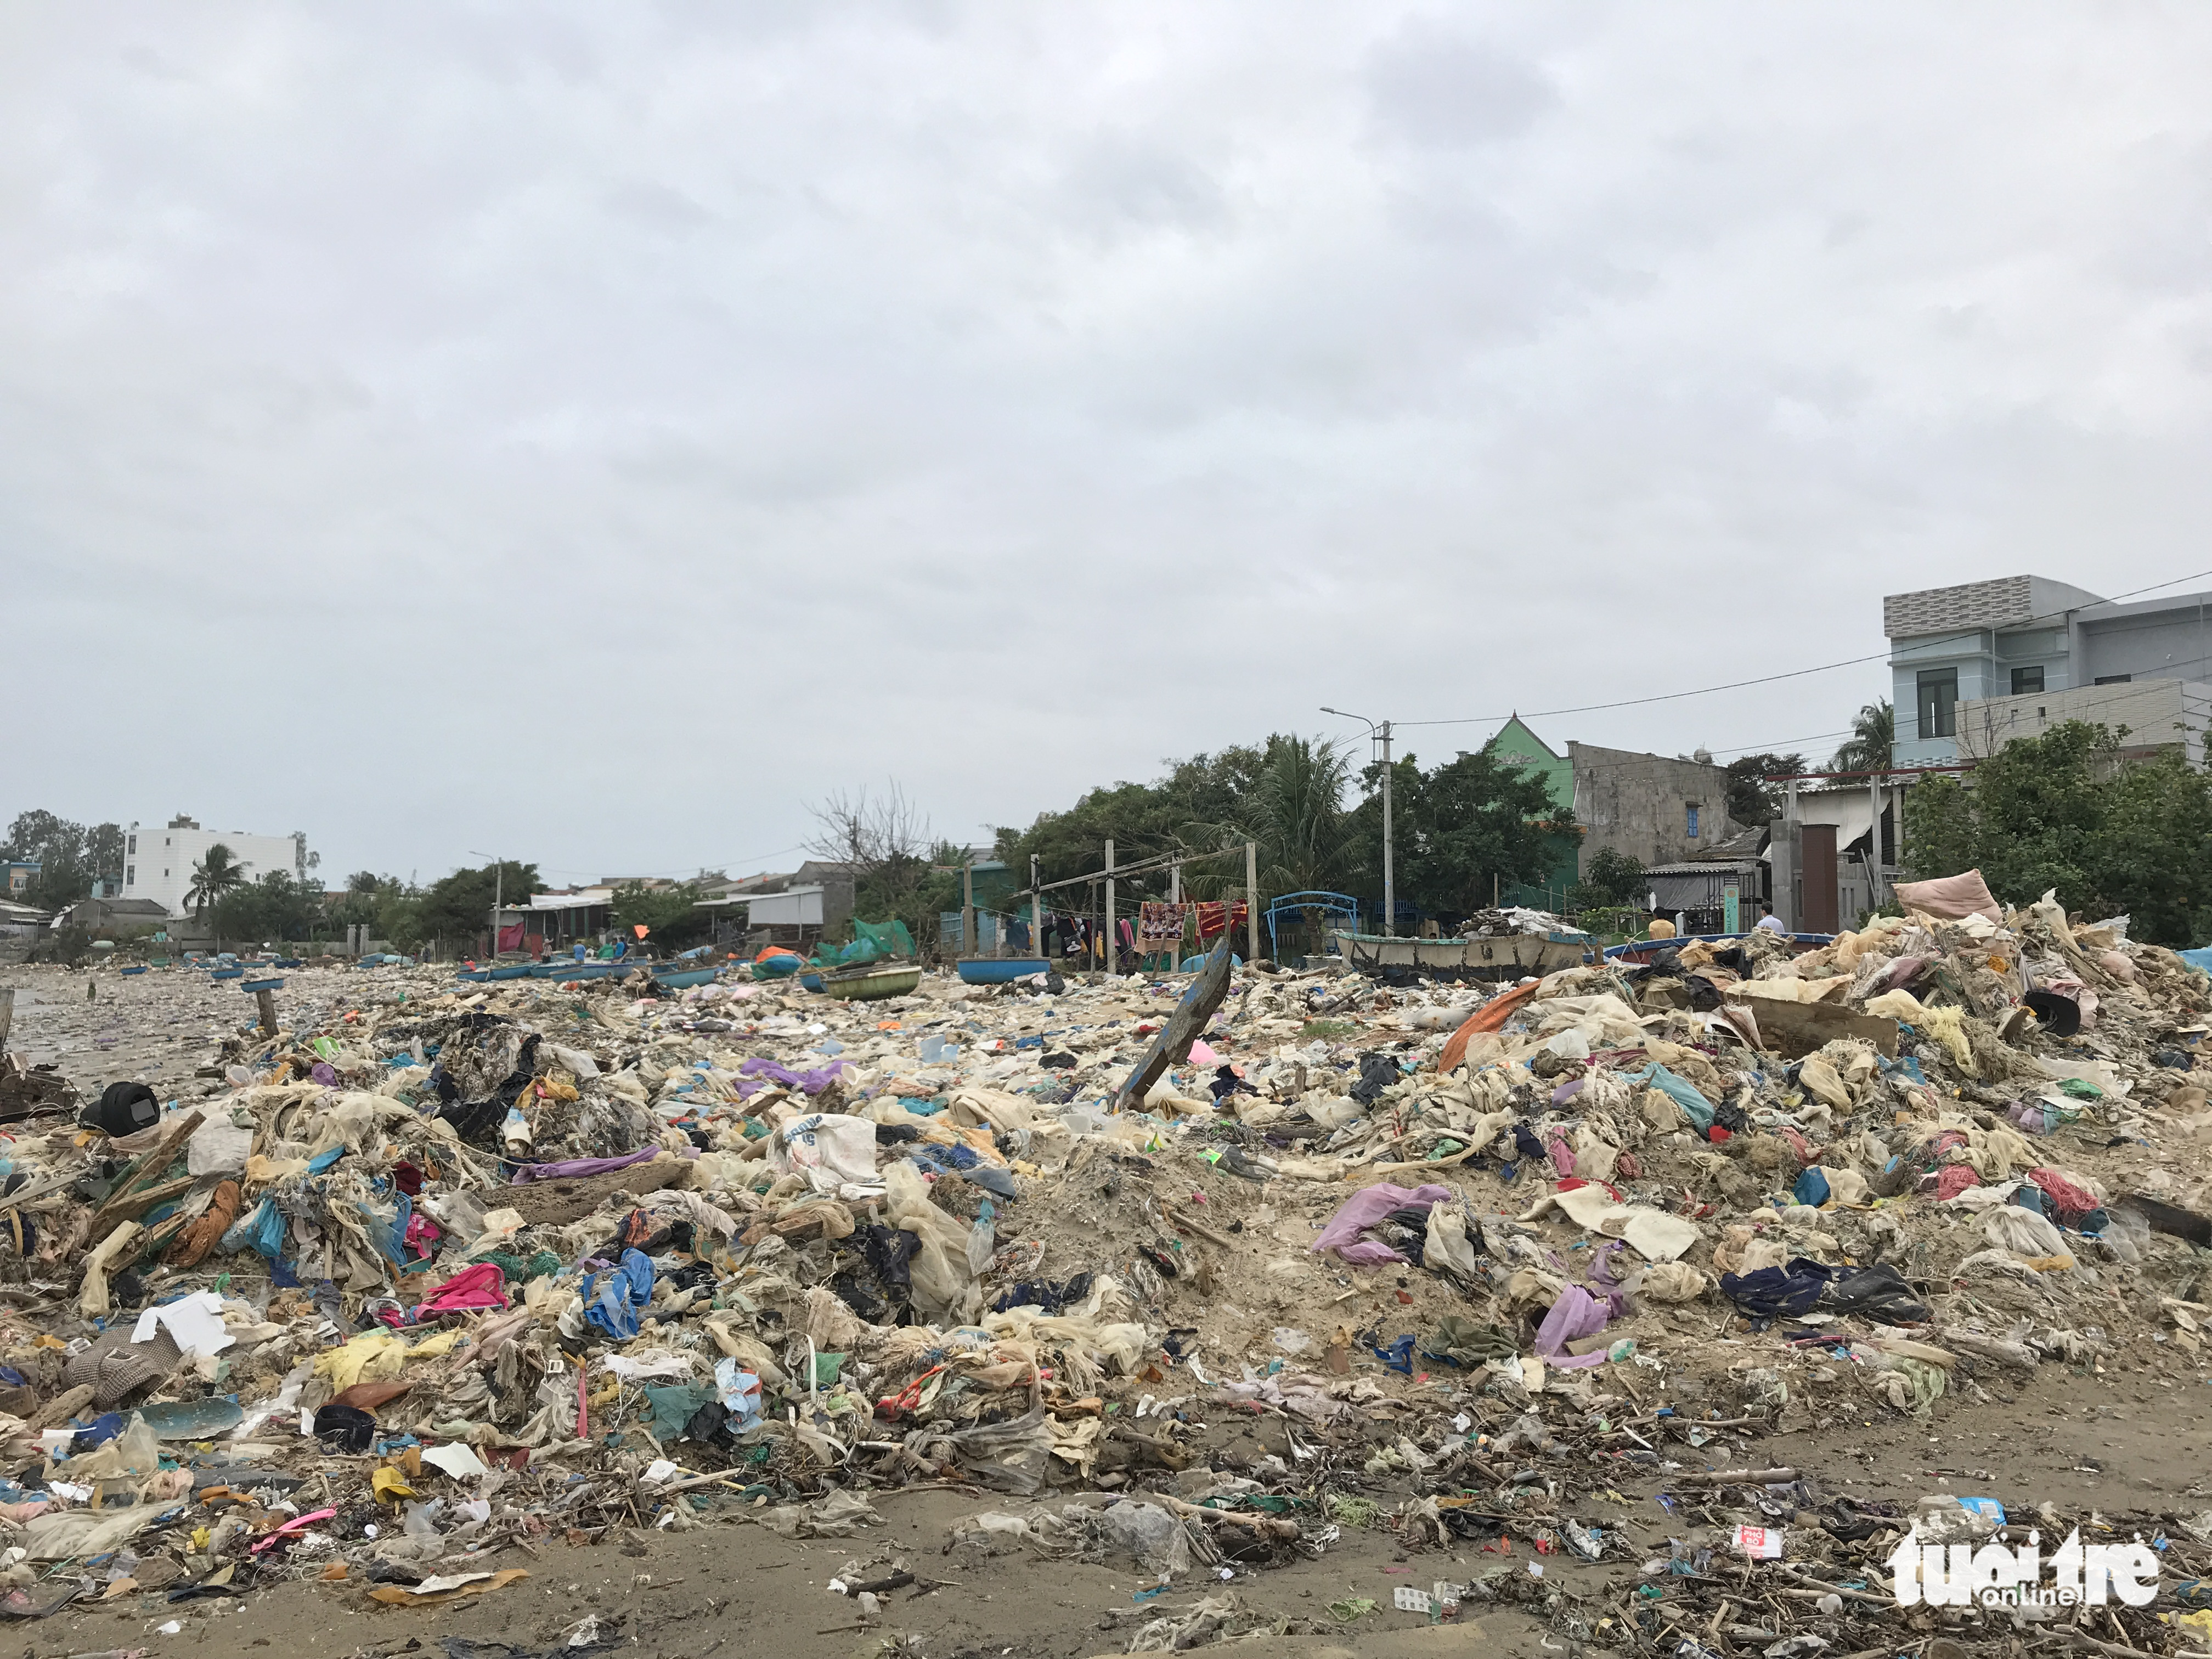 Trash is piled up on beaches in Tinh Ky Commune in Quang Ngai City, Quang Ngai Province, Vietnam, January 1, 2022. Photo: T.M. / Tuoi Tre